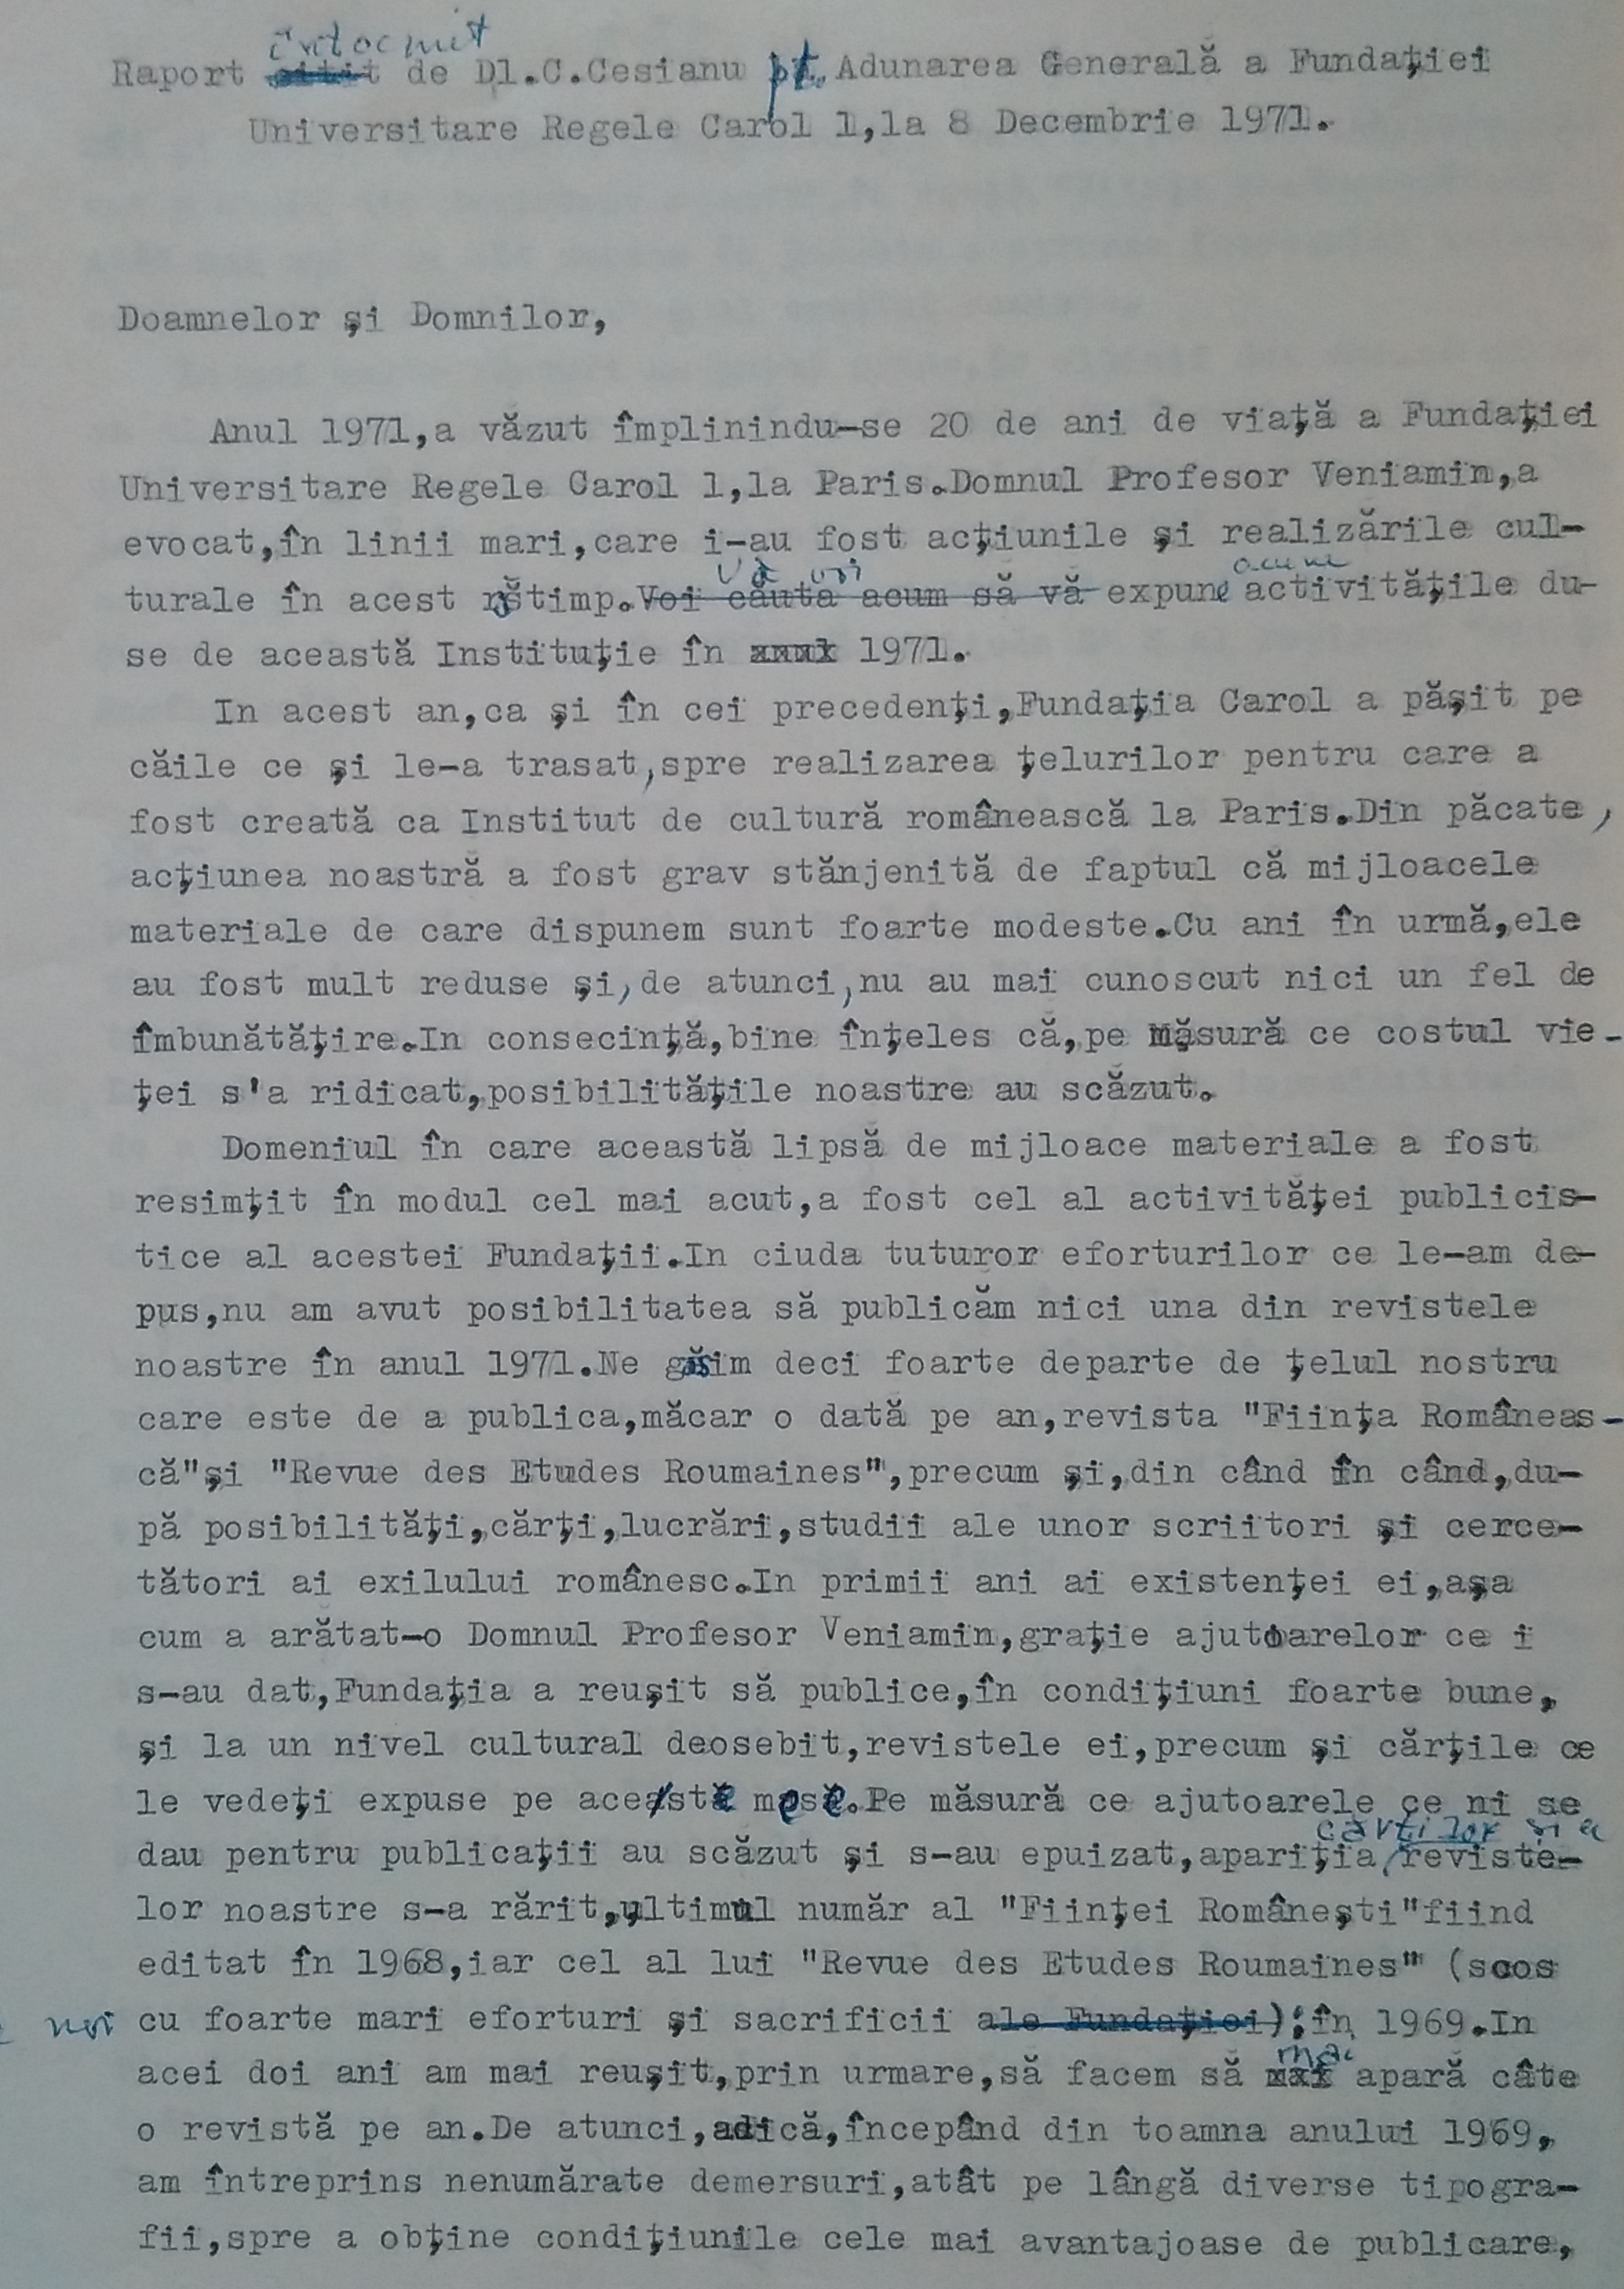 Report by Constantin Cesianu for the General Assembly of Carol I Royal University Foundation, Paris, 1971